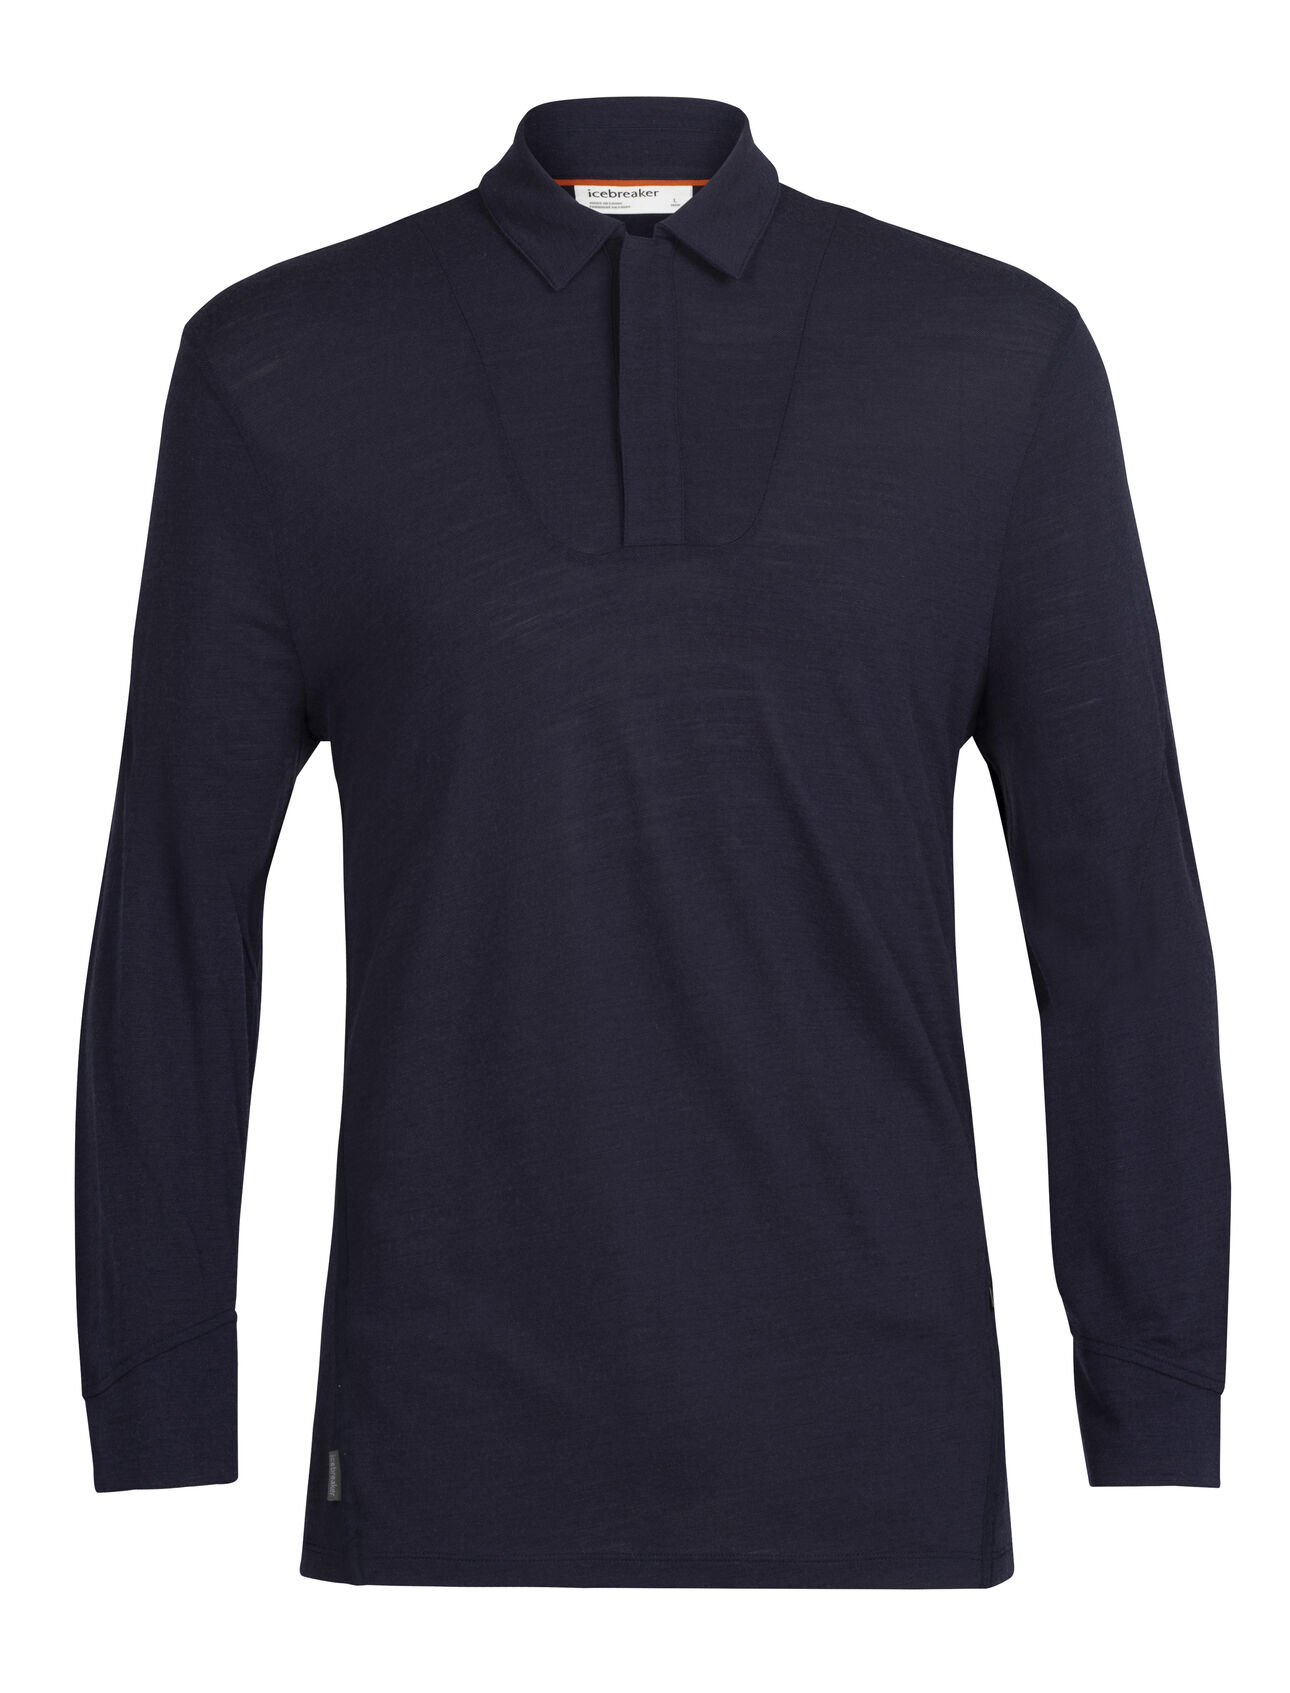 Mens Merino Pique Long Sleeve Polo A classic long sleeve polo made with our super-soft, 100% merino wool pique fabric, the Merino Pique Long Sleeve Polo offers natural breathability and everyday comfort.